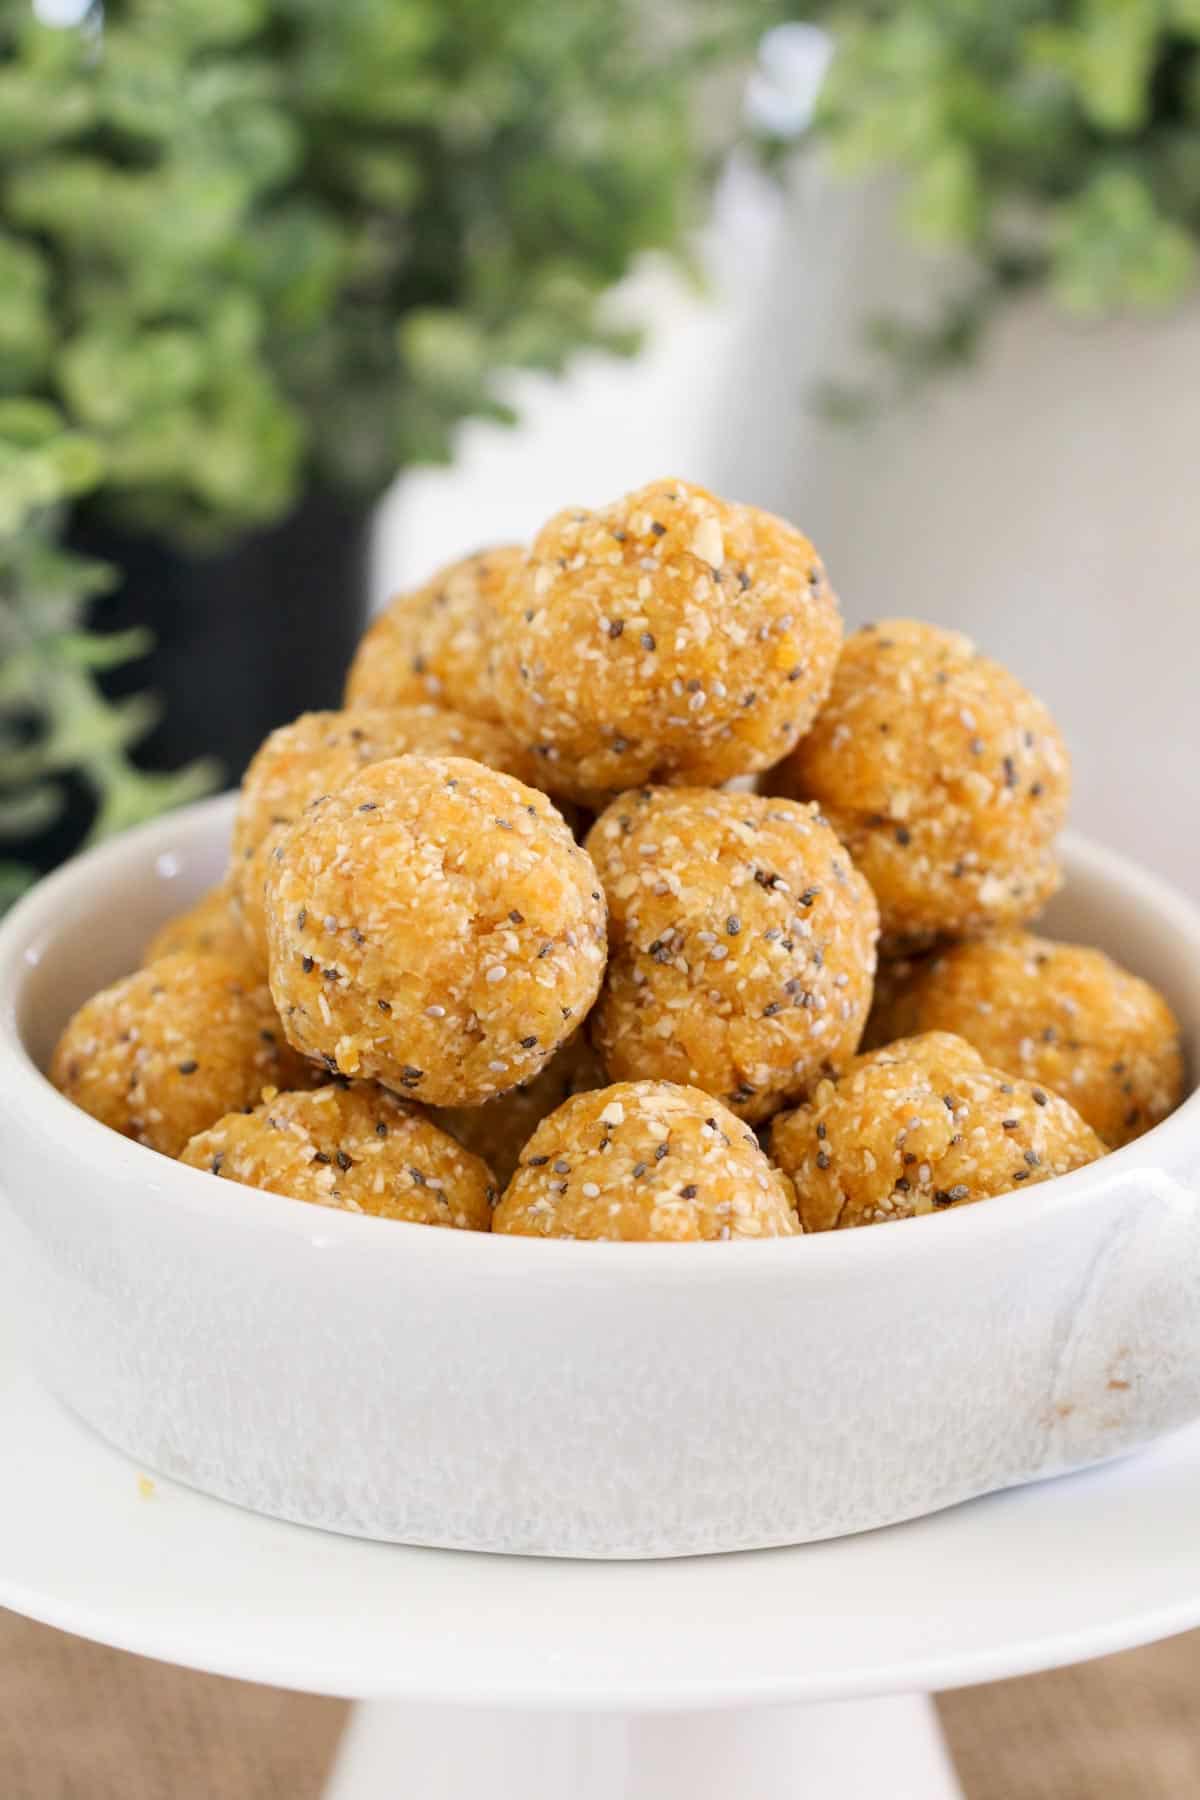 Apricot protein balls piled high in a white bowl.